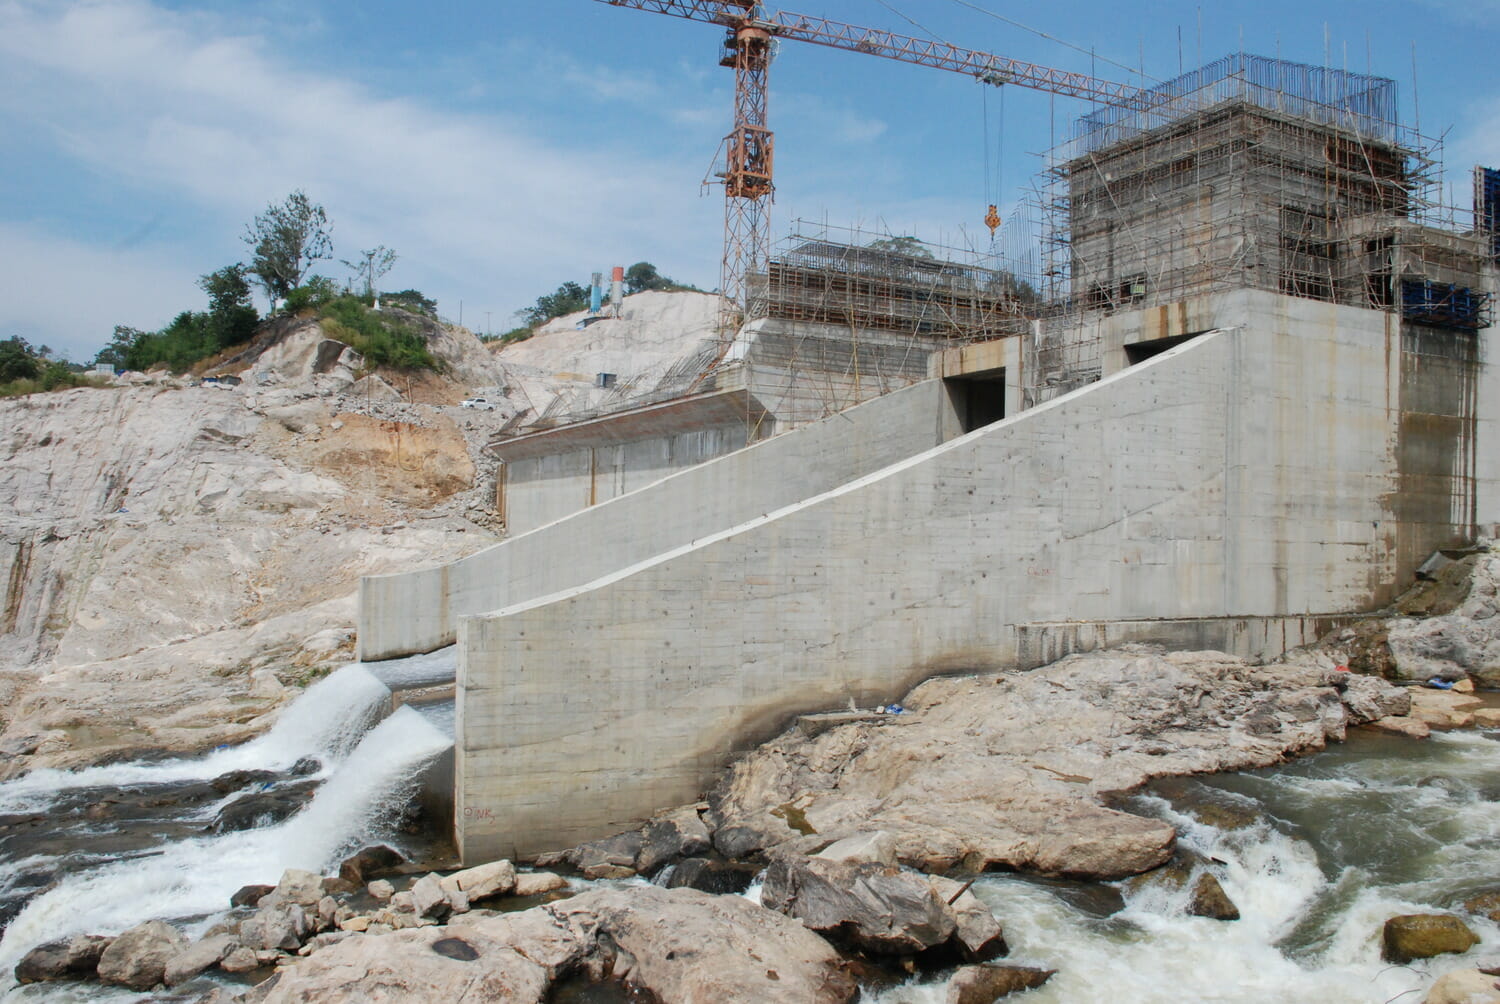 Construction of a dam on a river.